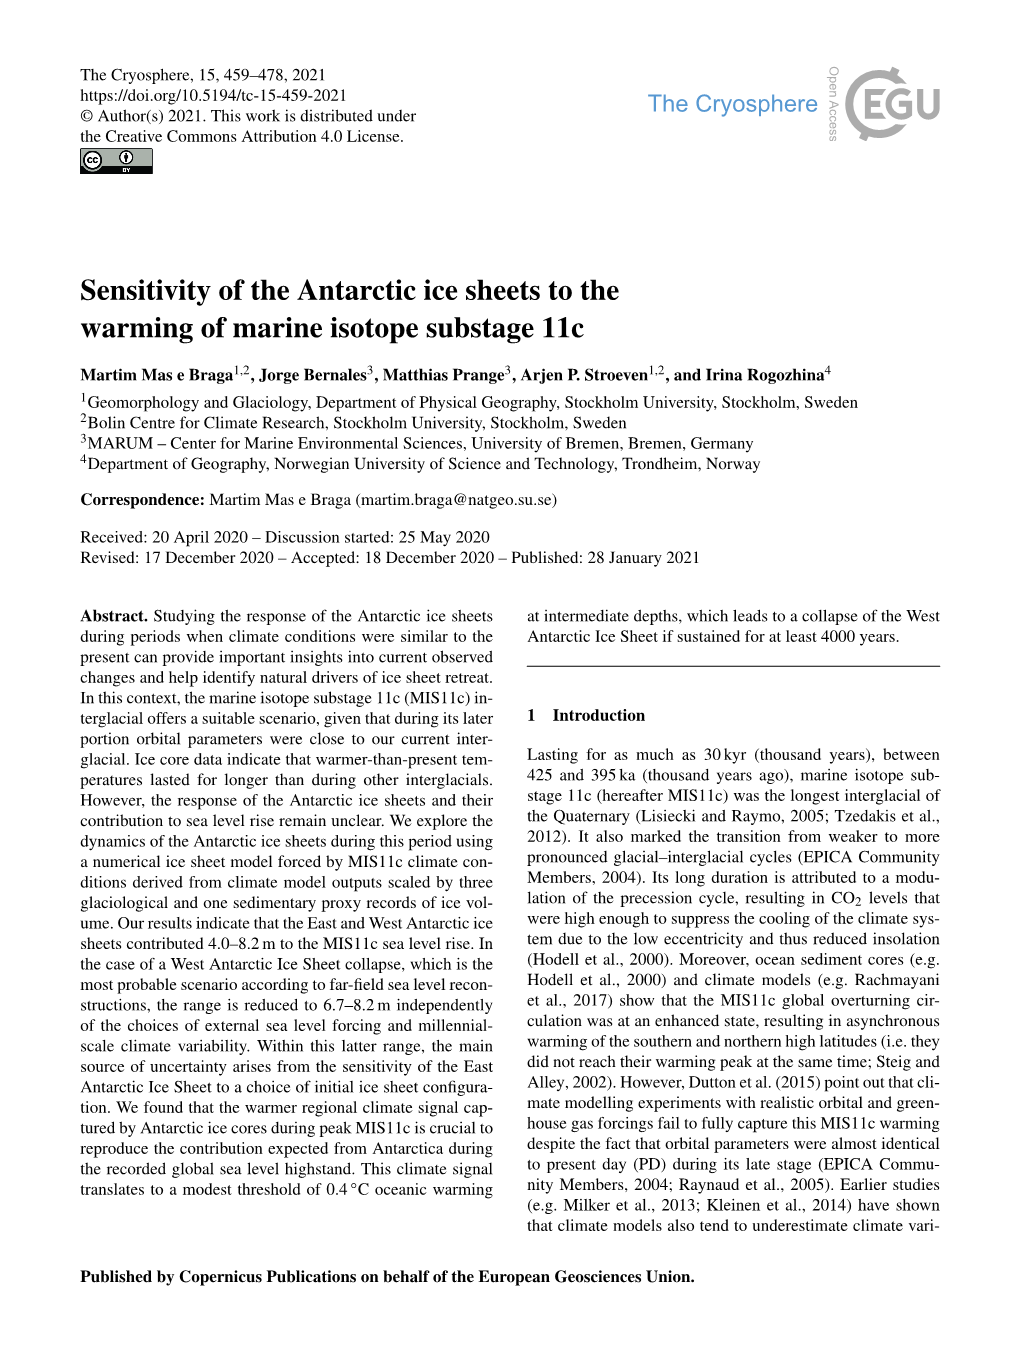 Sensitivity of the Antarctic Ice Sheets to the Warming of Marine Isotope Substage 11C